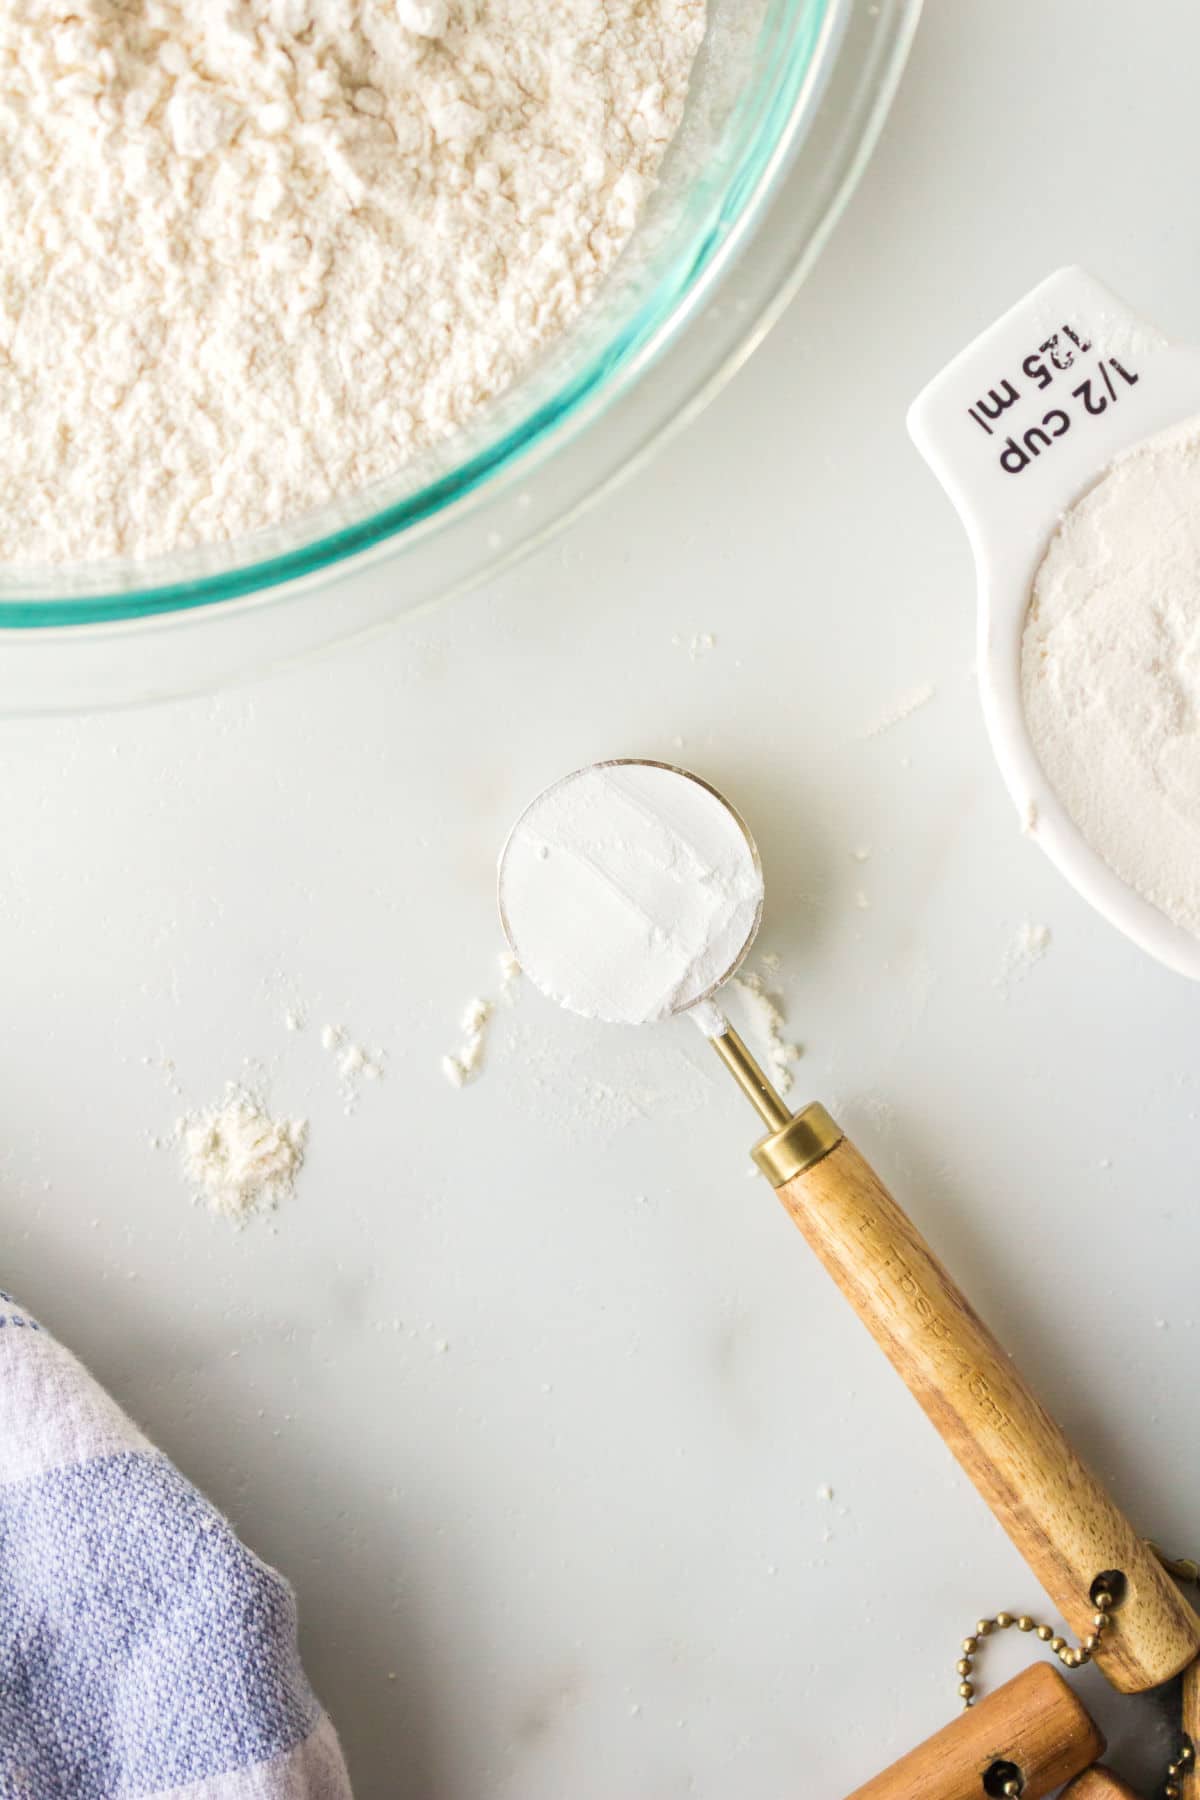 A measuring spoon with baking powder next to a bowl of flour.